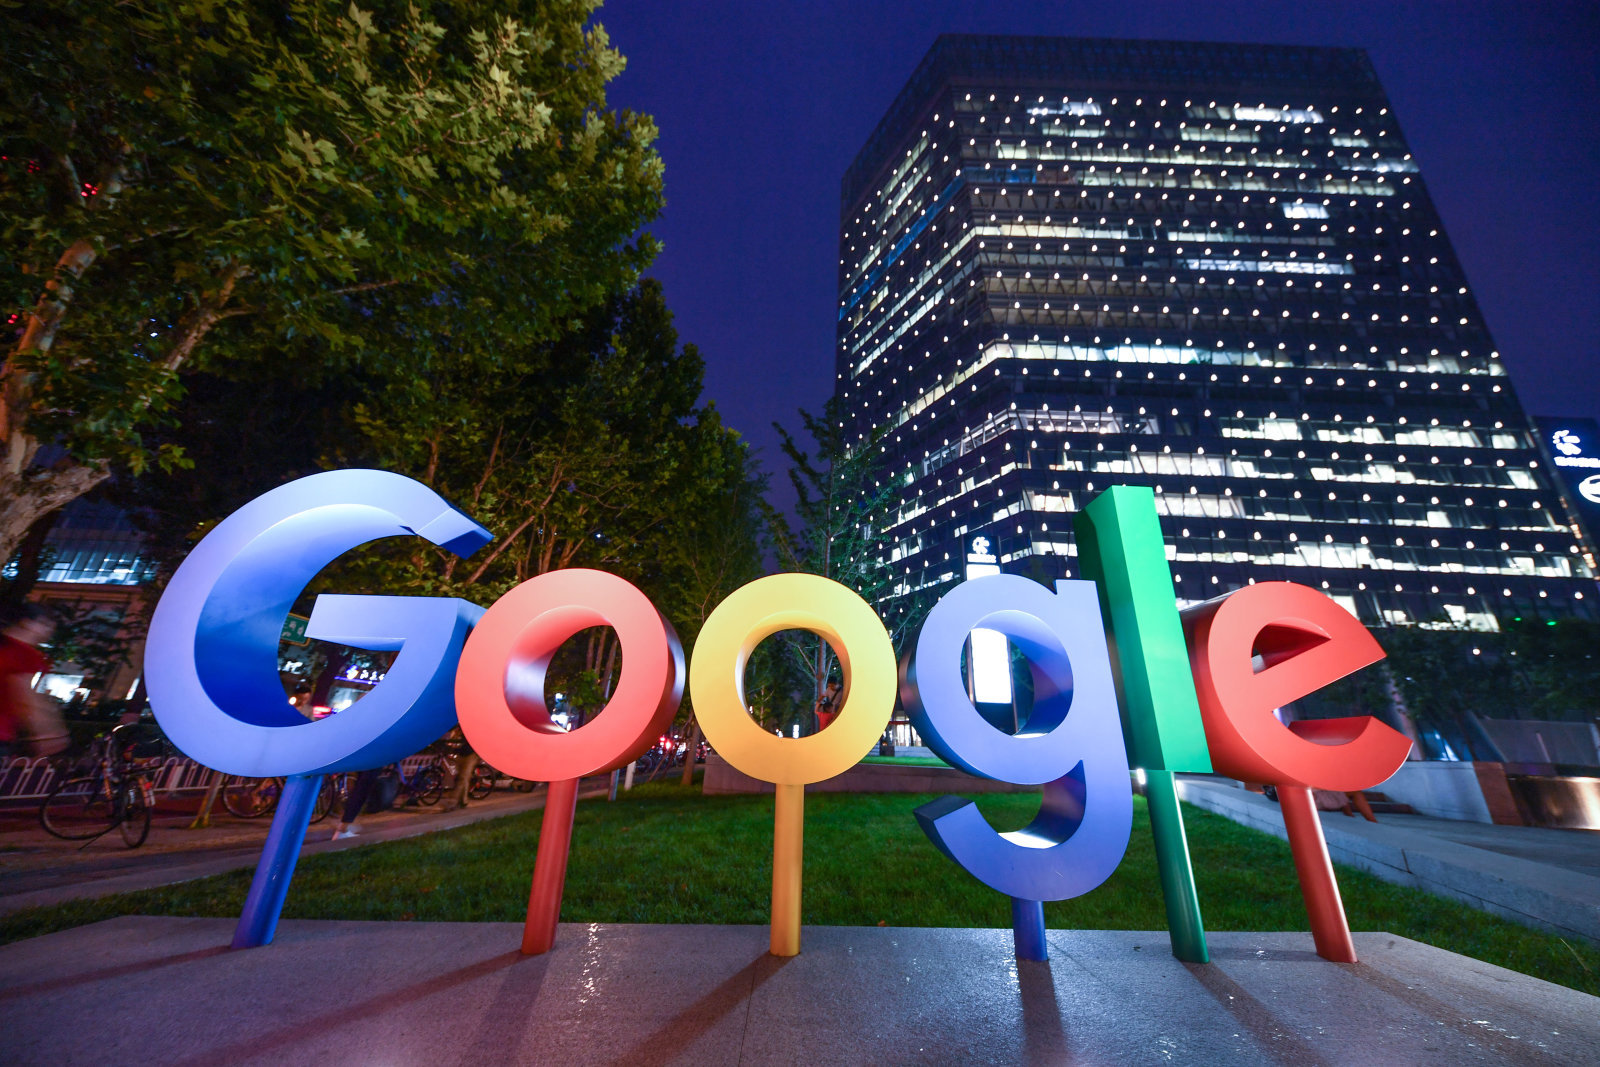 BEIJING, CHINA - AUGUST 07: The Google Inc. logo is illuminated in front of Google Beijing Office on August 7, 2018 in Beijing, China. According to China Daily, Google Inc. plans to offer cloud services in Mainland China, and it is in talks with several Chinese companies, such as Tencent Holdings Ltd and Inspur Group. (Photo by VCG via Getty Images)